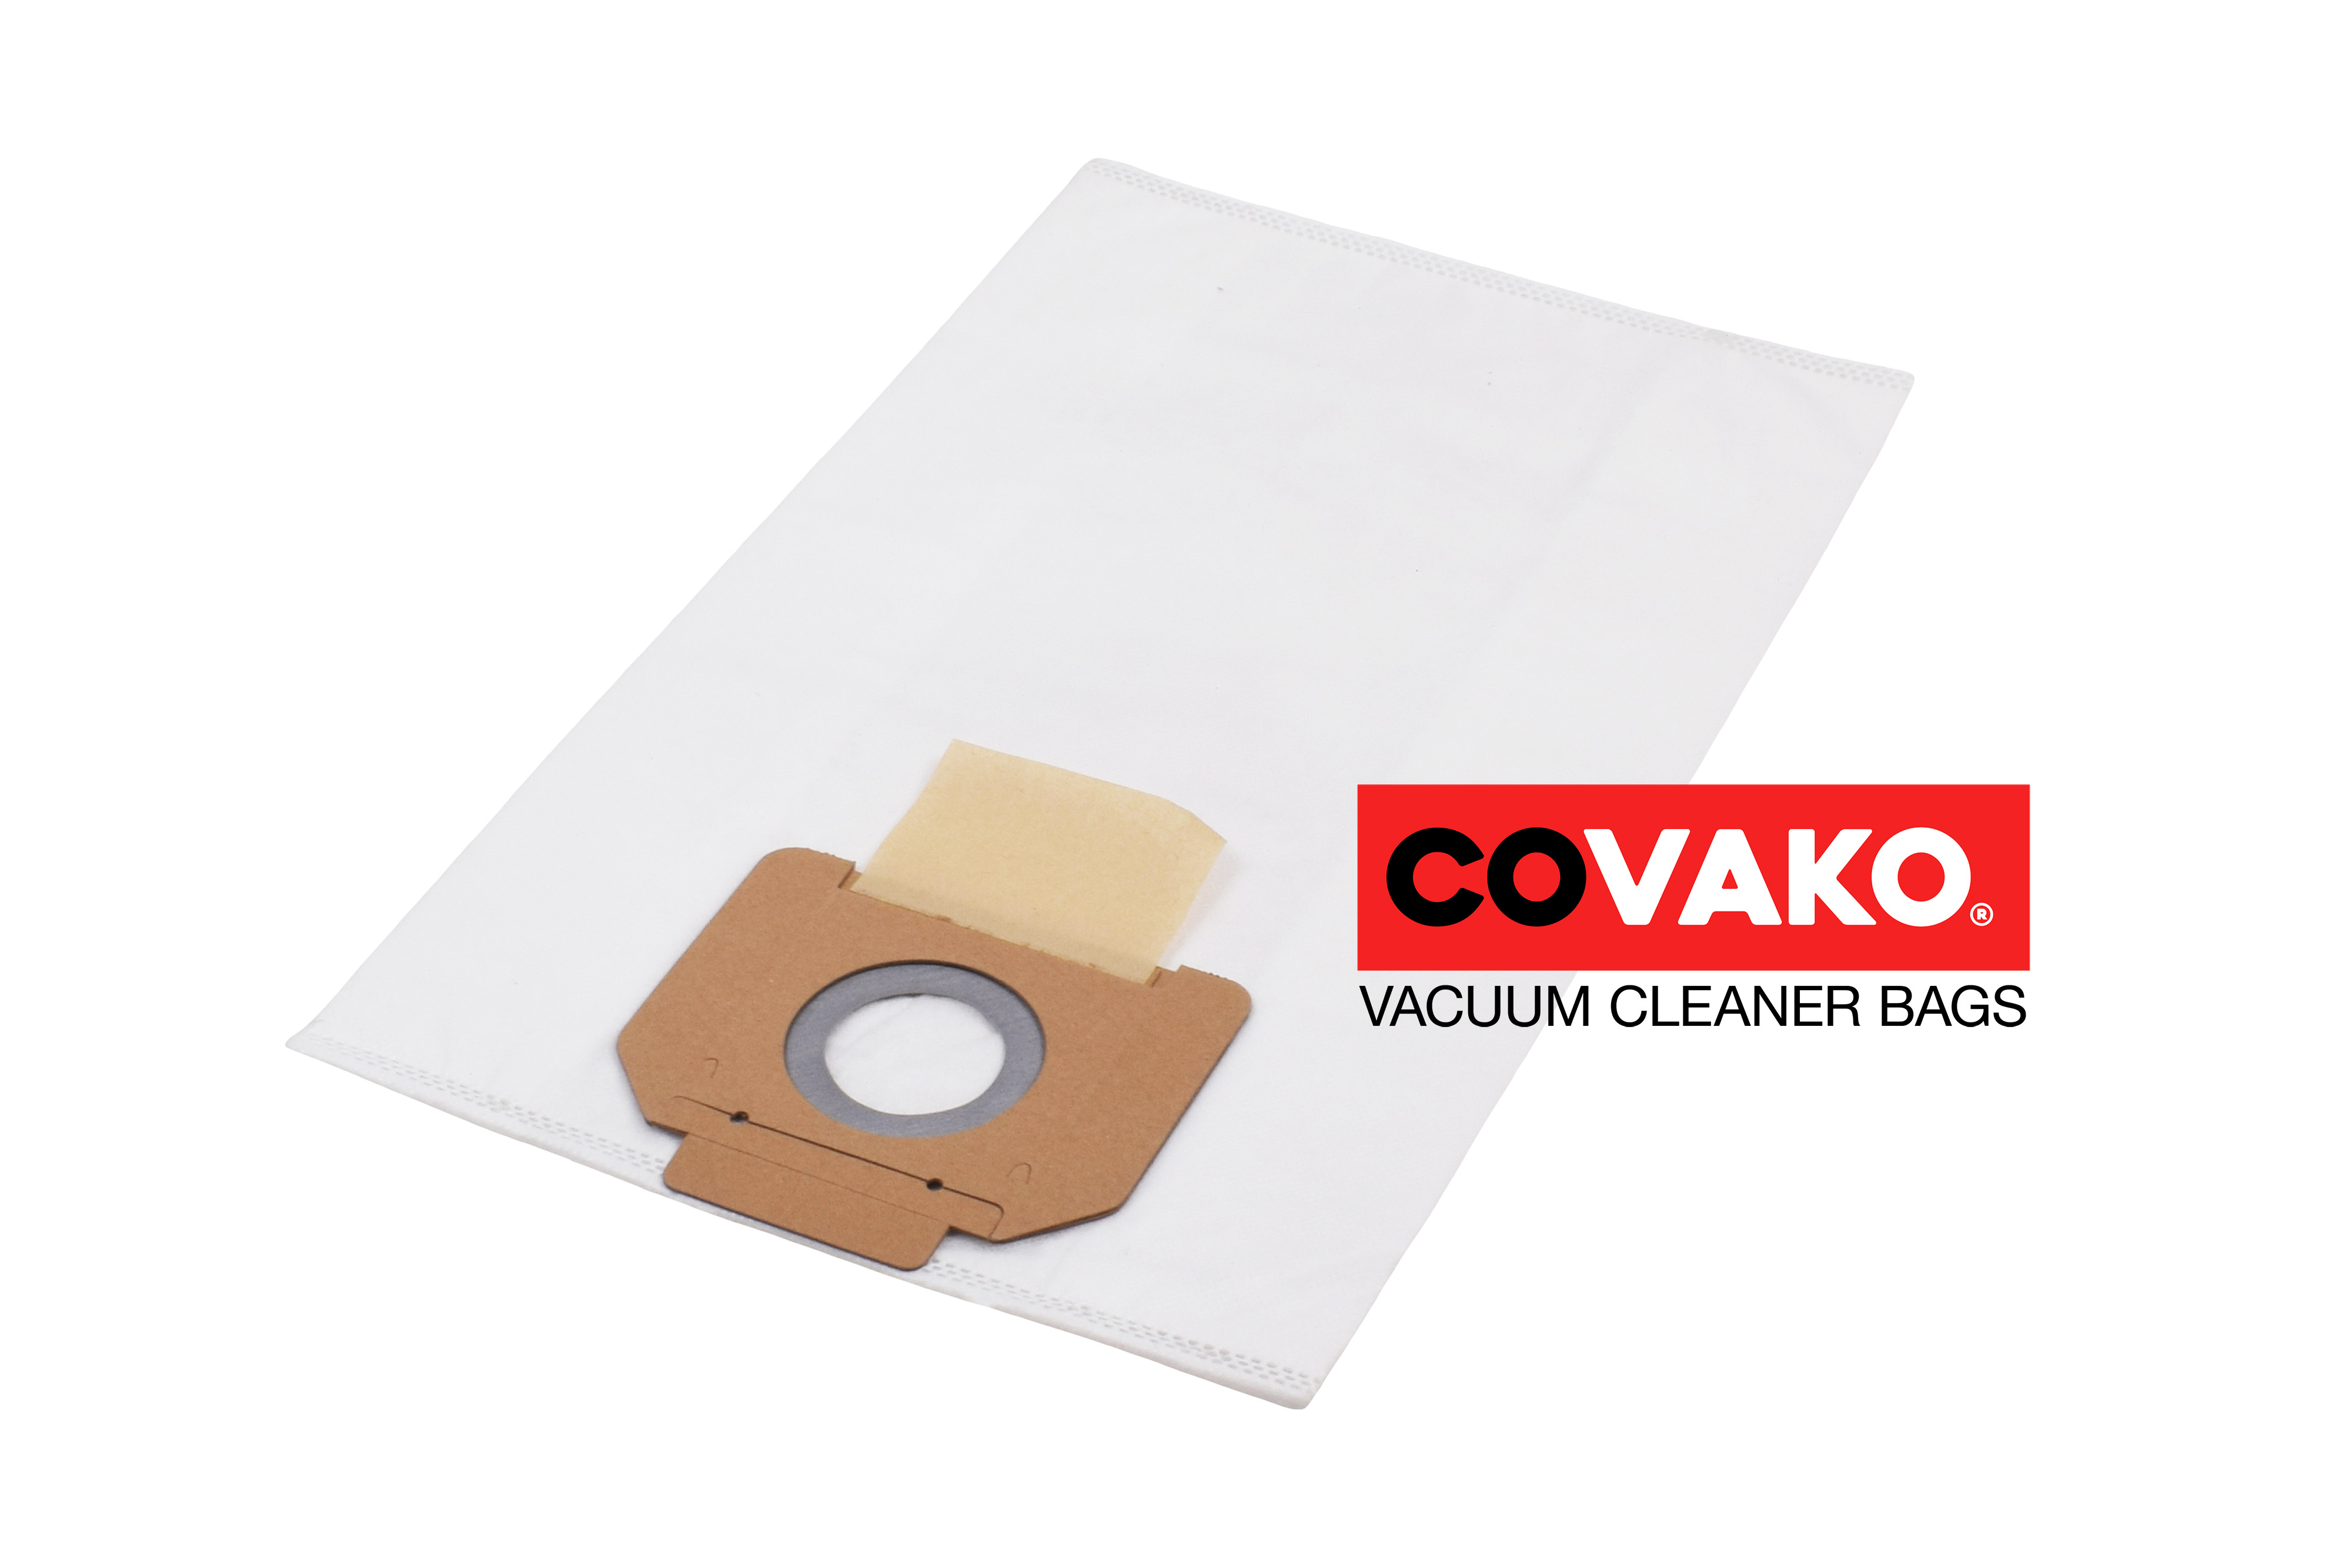 Gansow GP 1/16 W&D / Synthesis - Gansow vacuum cleaner bags